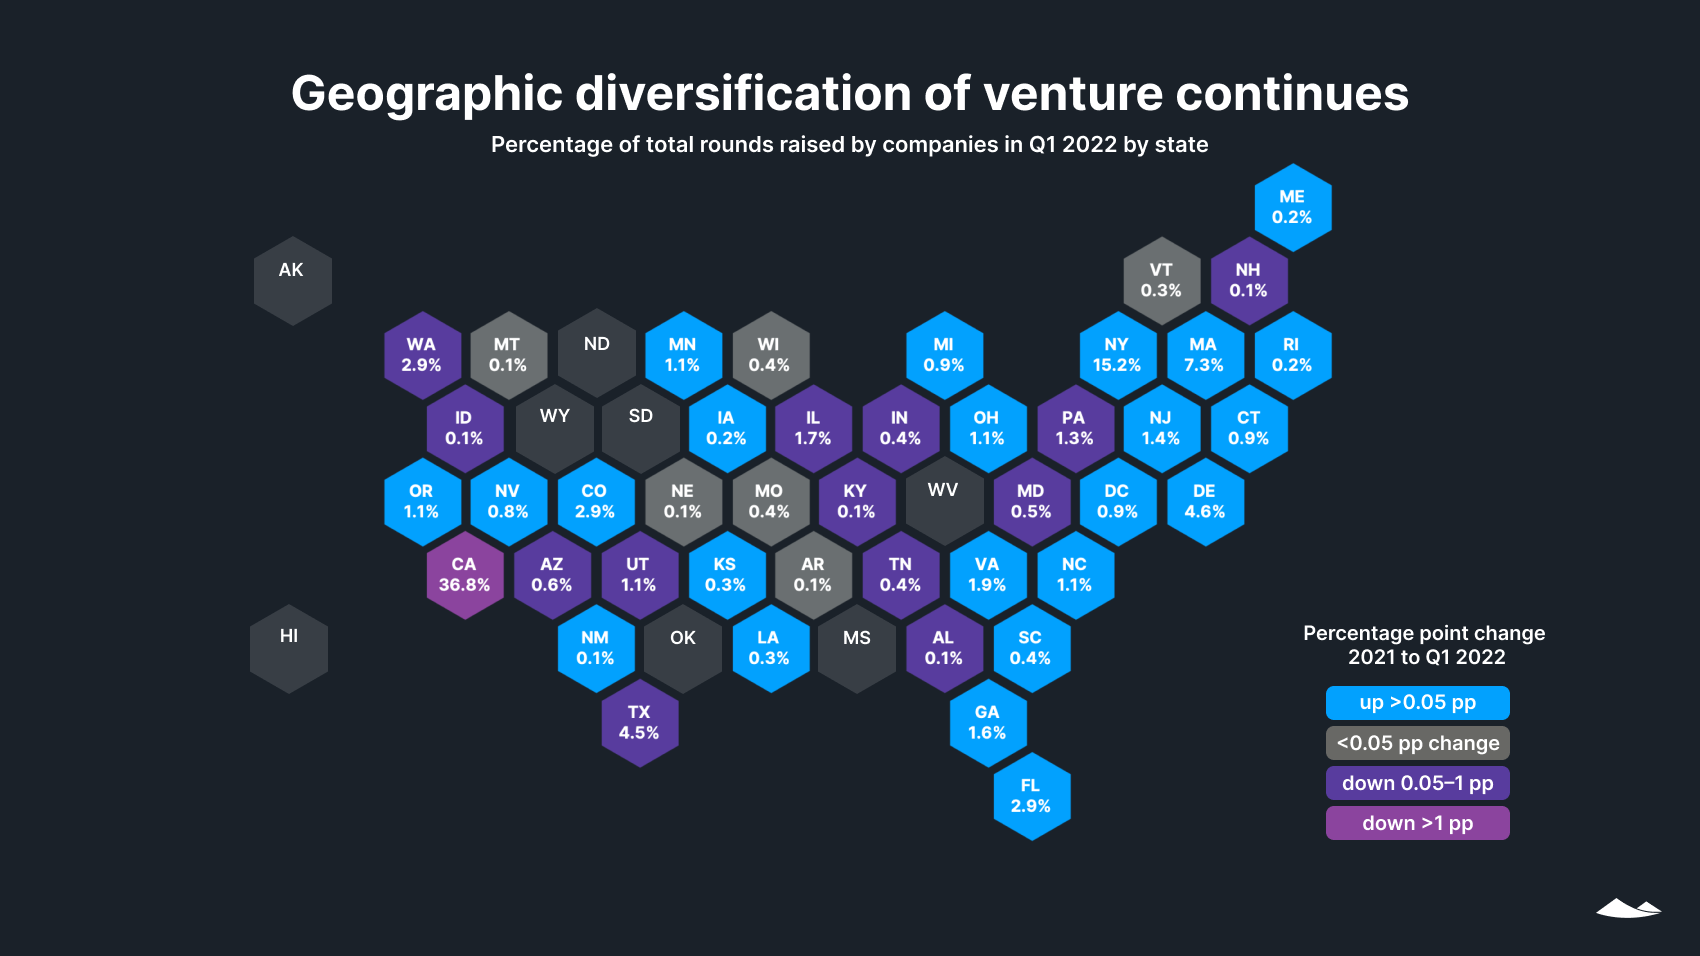 Hex map shows the percentage of all venture capital rounds by state. California has the largest at 36.8% and a drop of more than a percentage point from 2021 to Q1 2022.